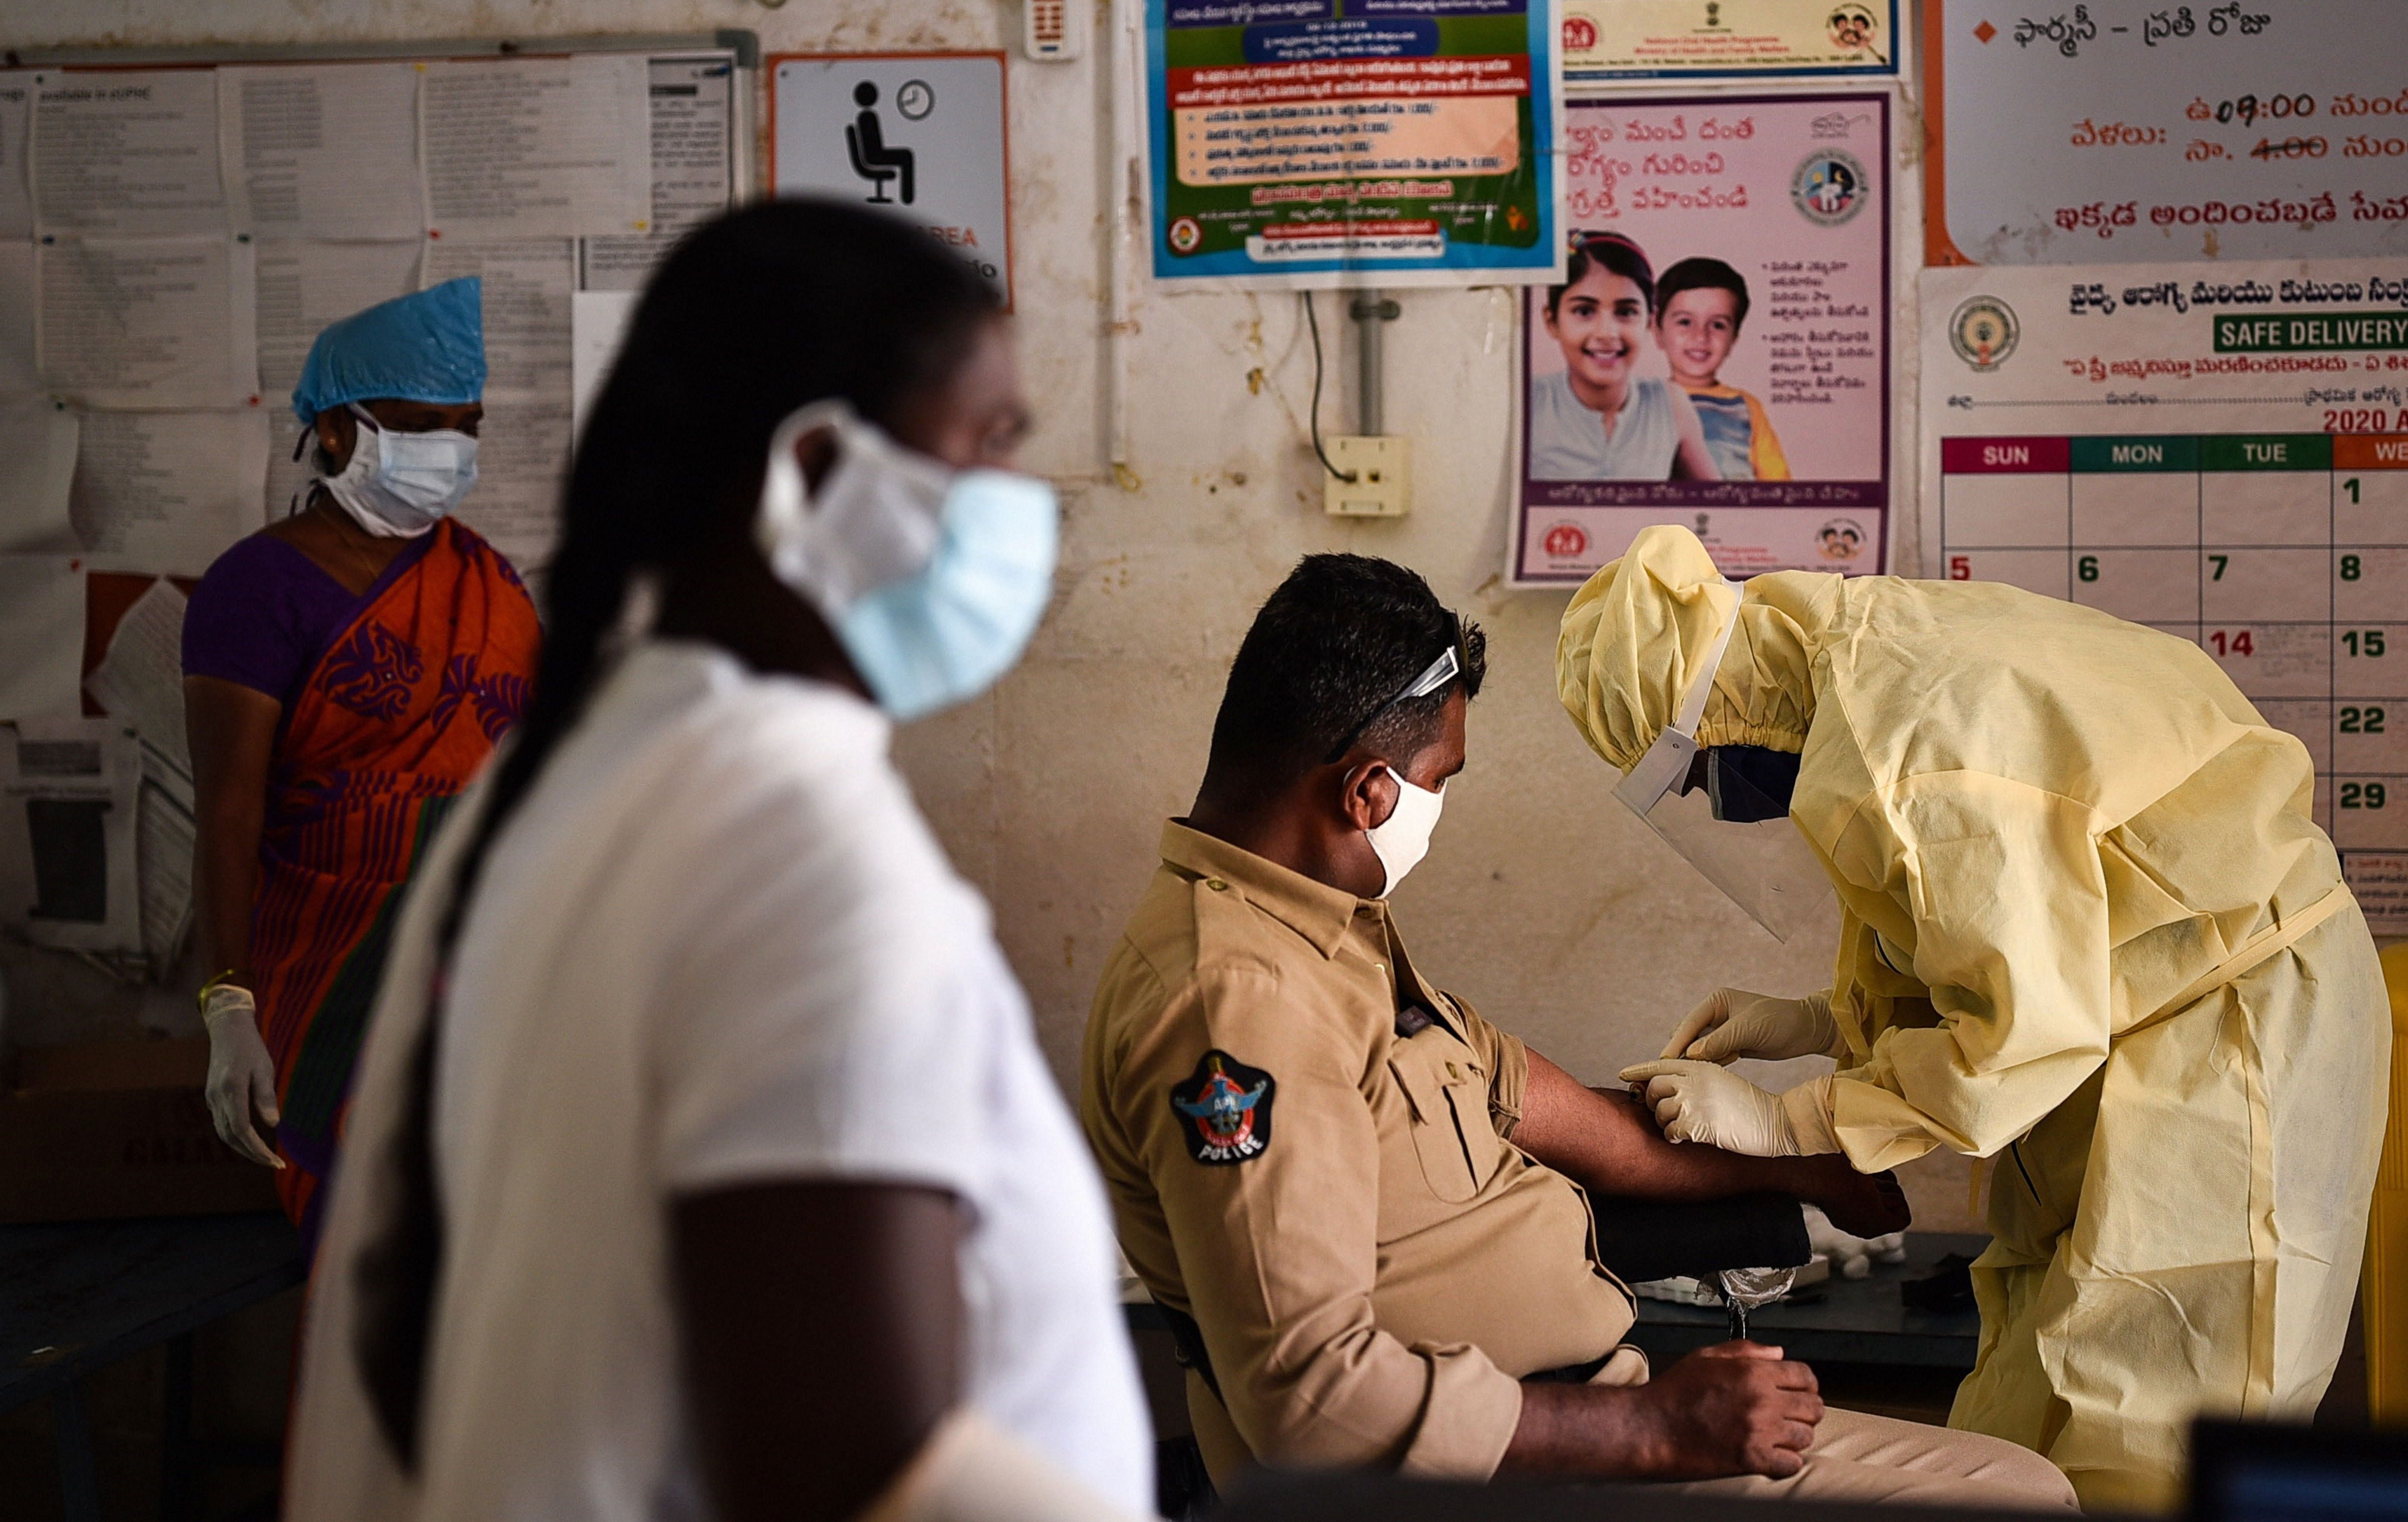 A healthcare worker takes blood sample of a policeman for COVID-19 test in wake of the coronavirus pandemic, in Vijayawada. (PTI Photo)